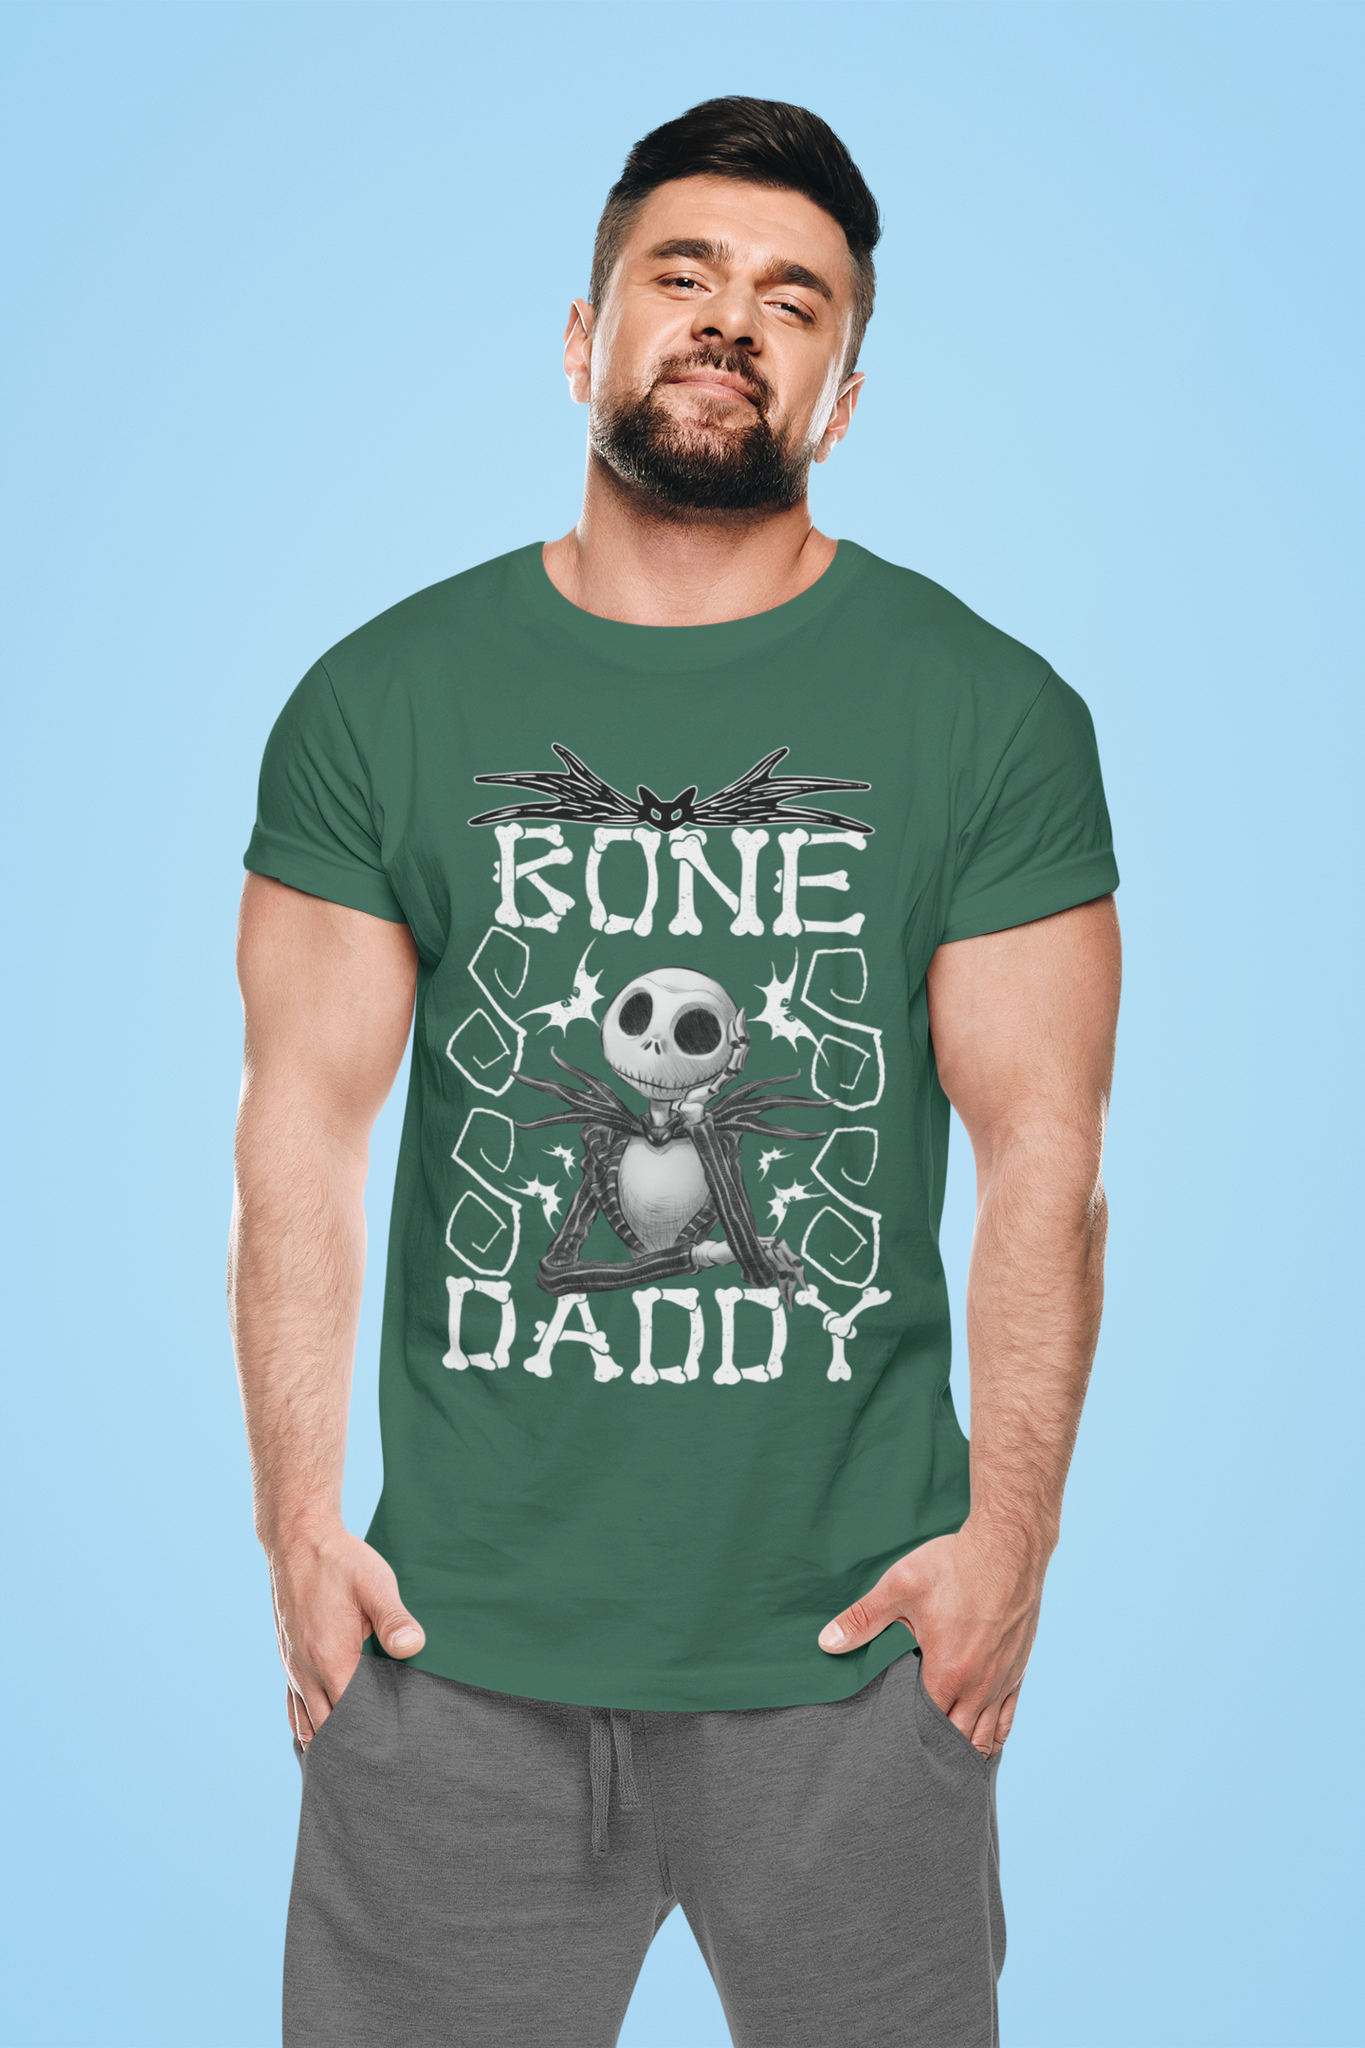 Nightmare Before Christmas T Shirt, Jack Skellington T Shirt, Bone Daddy Tshirt, Fathers Day Gifts